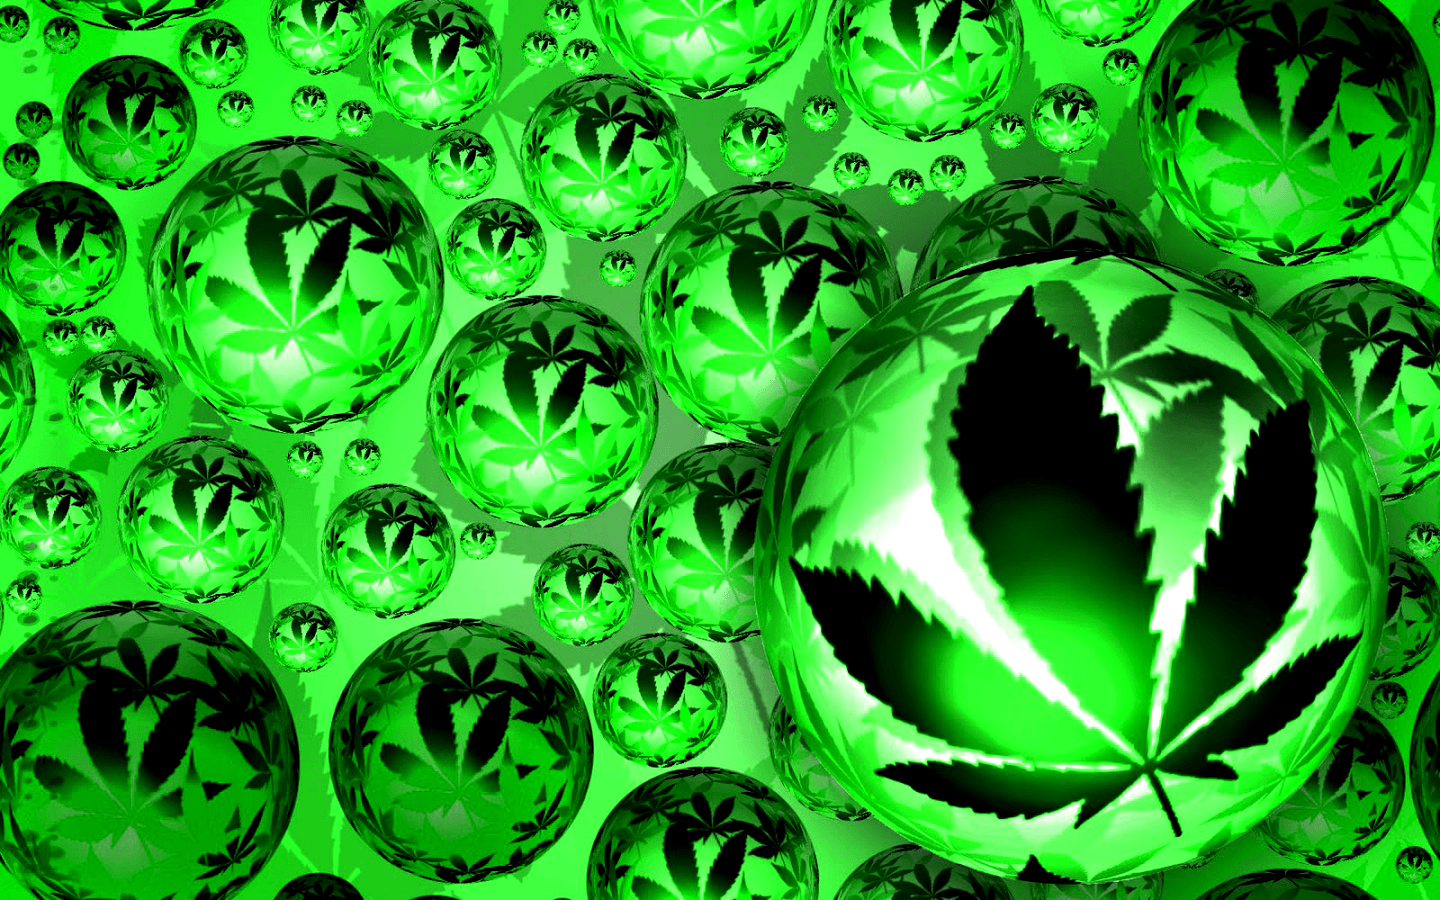 Freapp and Weed Wallpaper Do you like Marihuana, weed